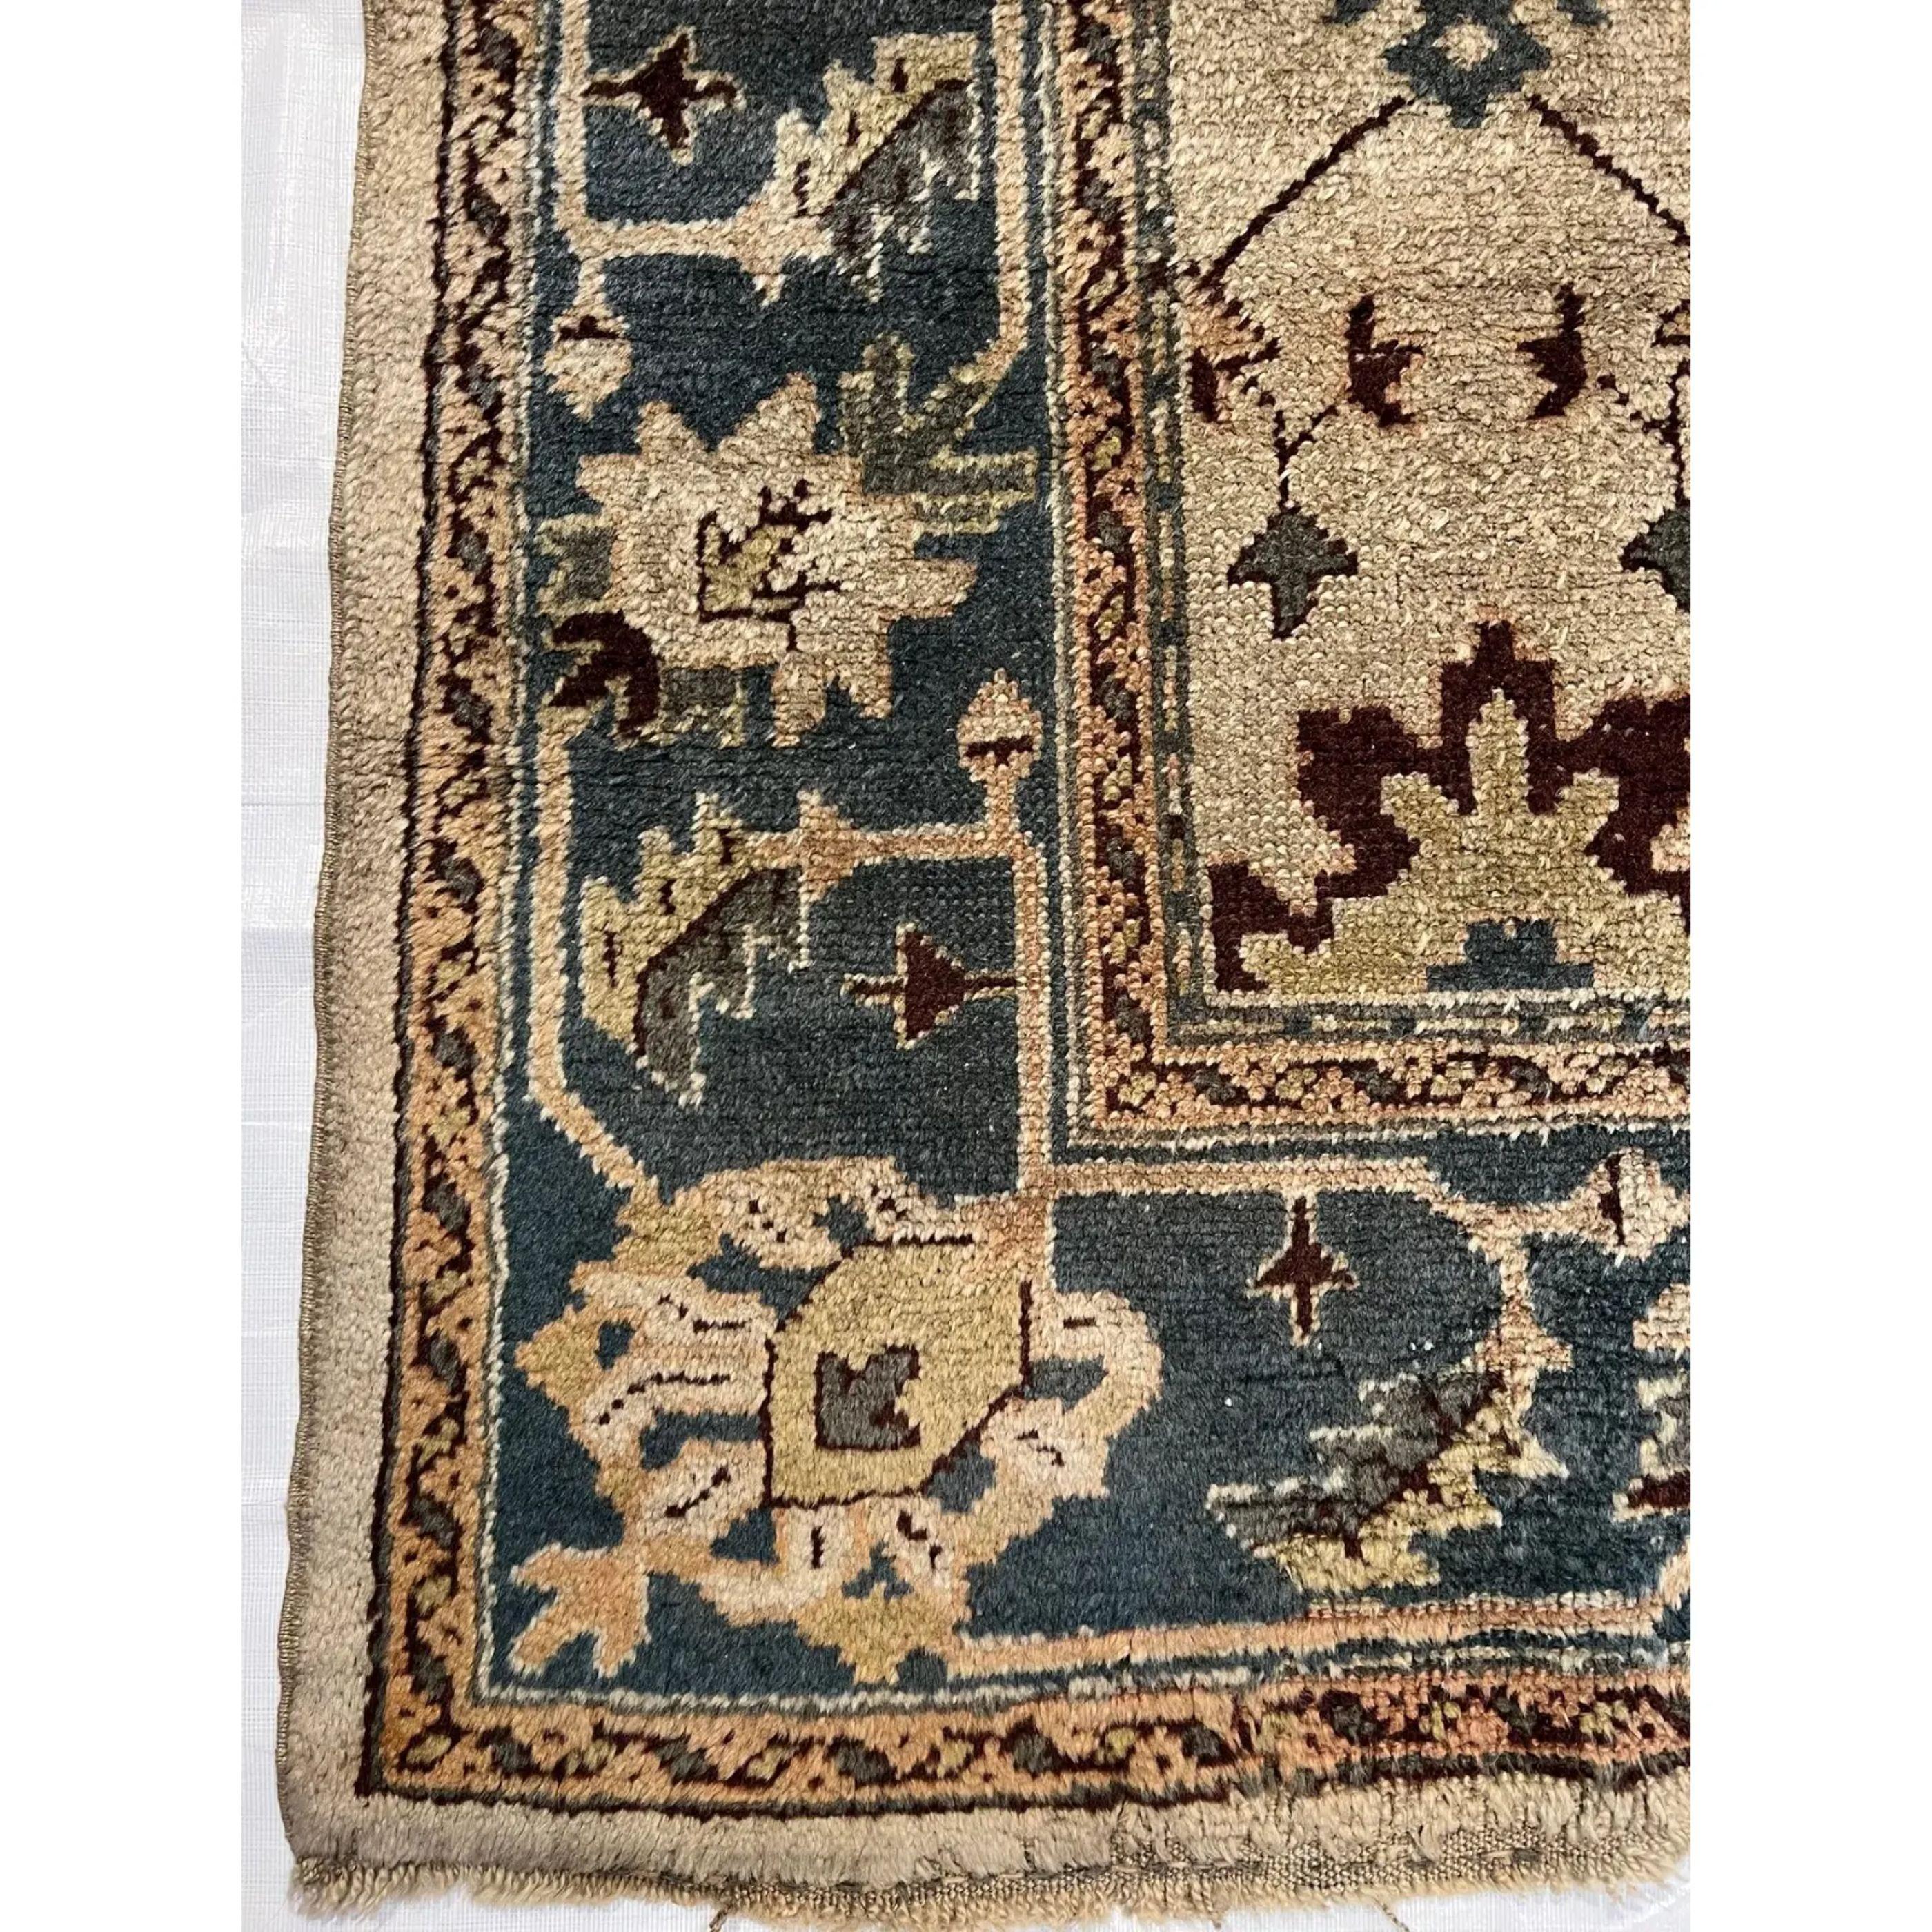 Early 20th Century 1900s Mid-19th Century Tribal Turkish Oushak Rug 10'0'' X 6'10'' For Sale